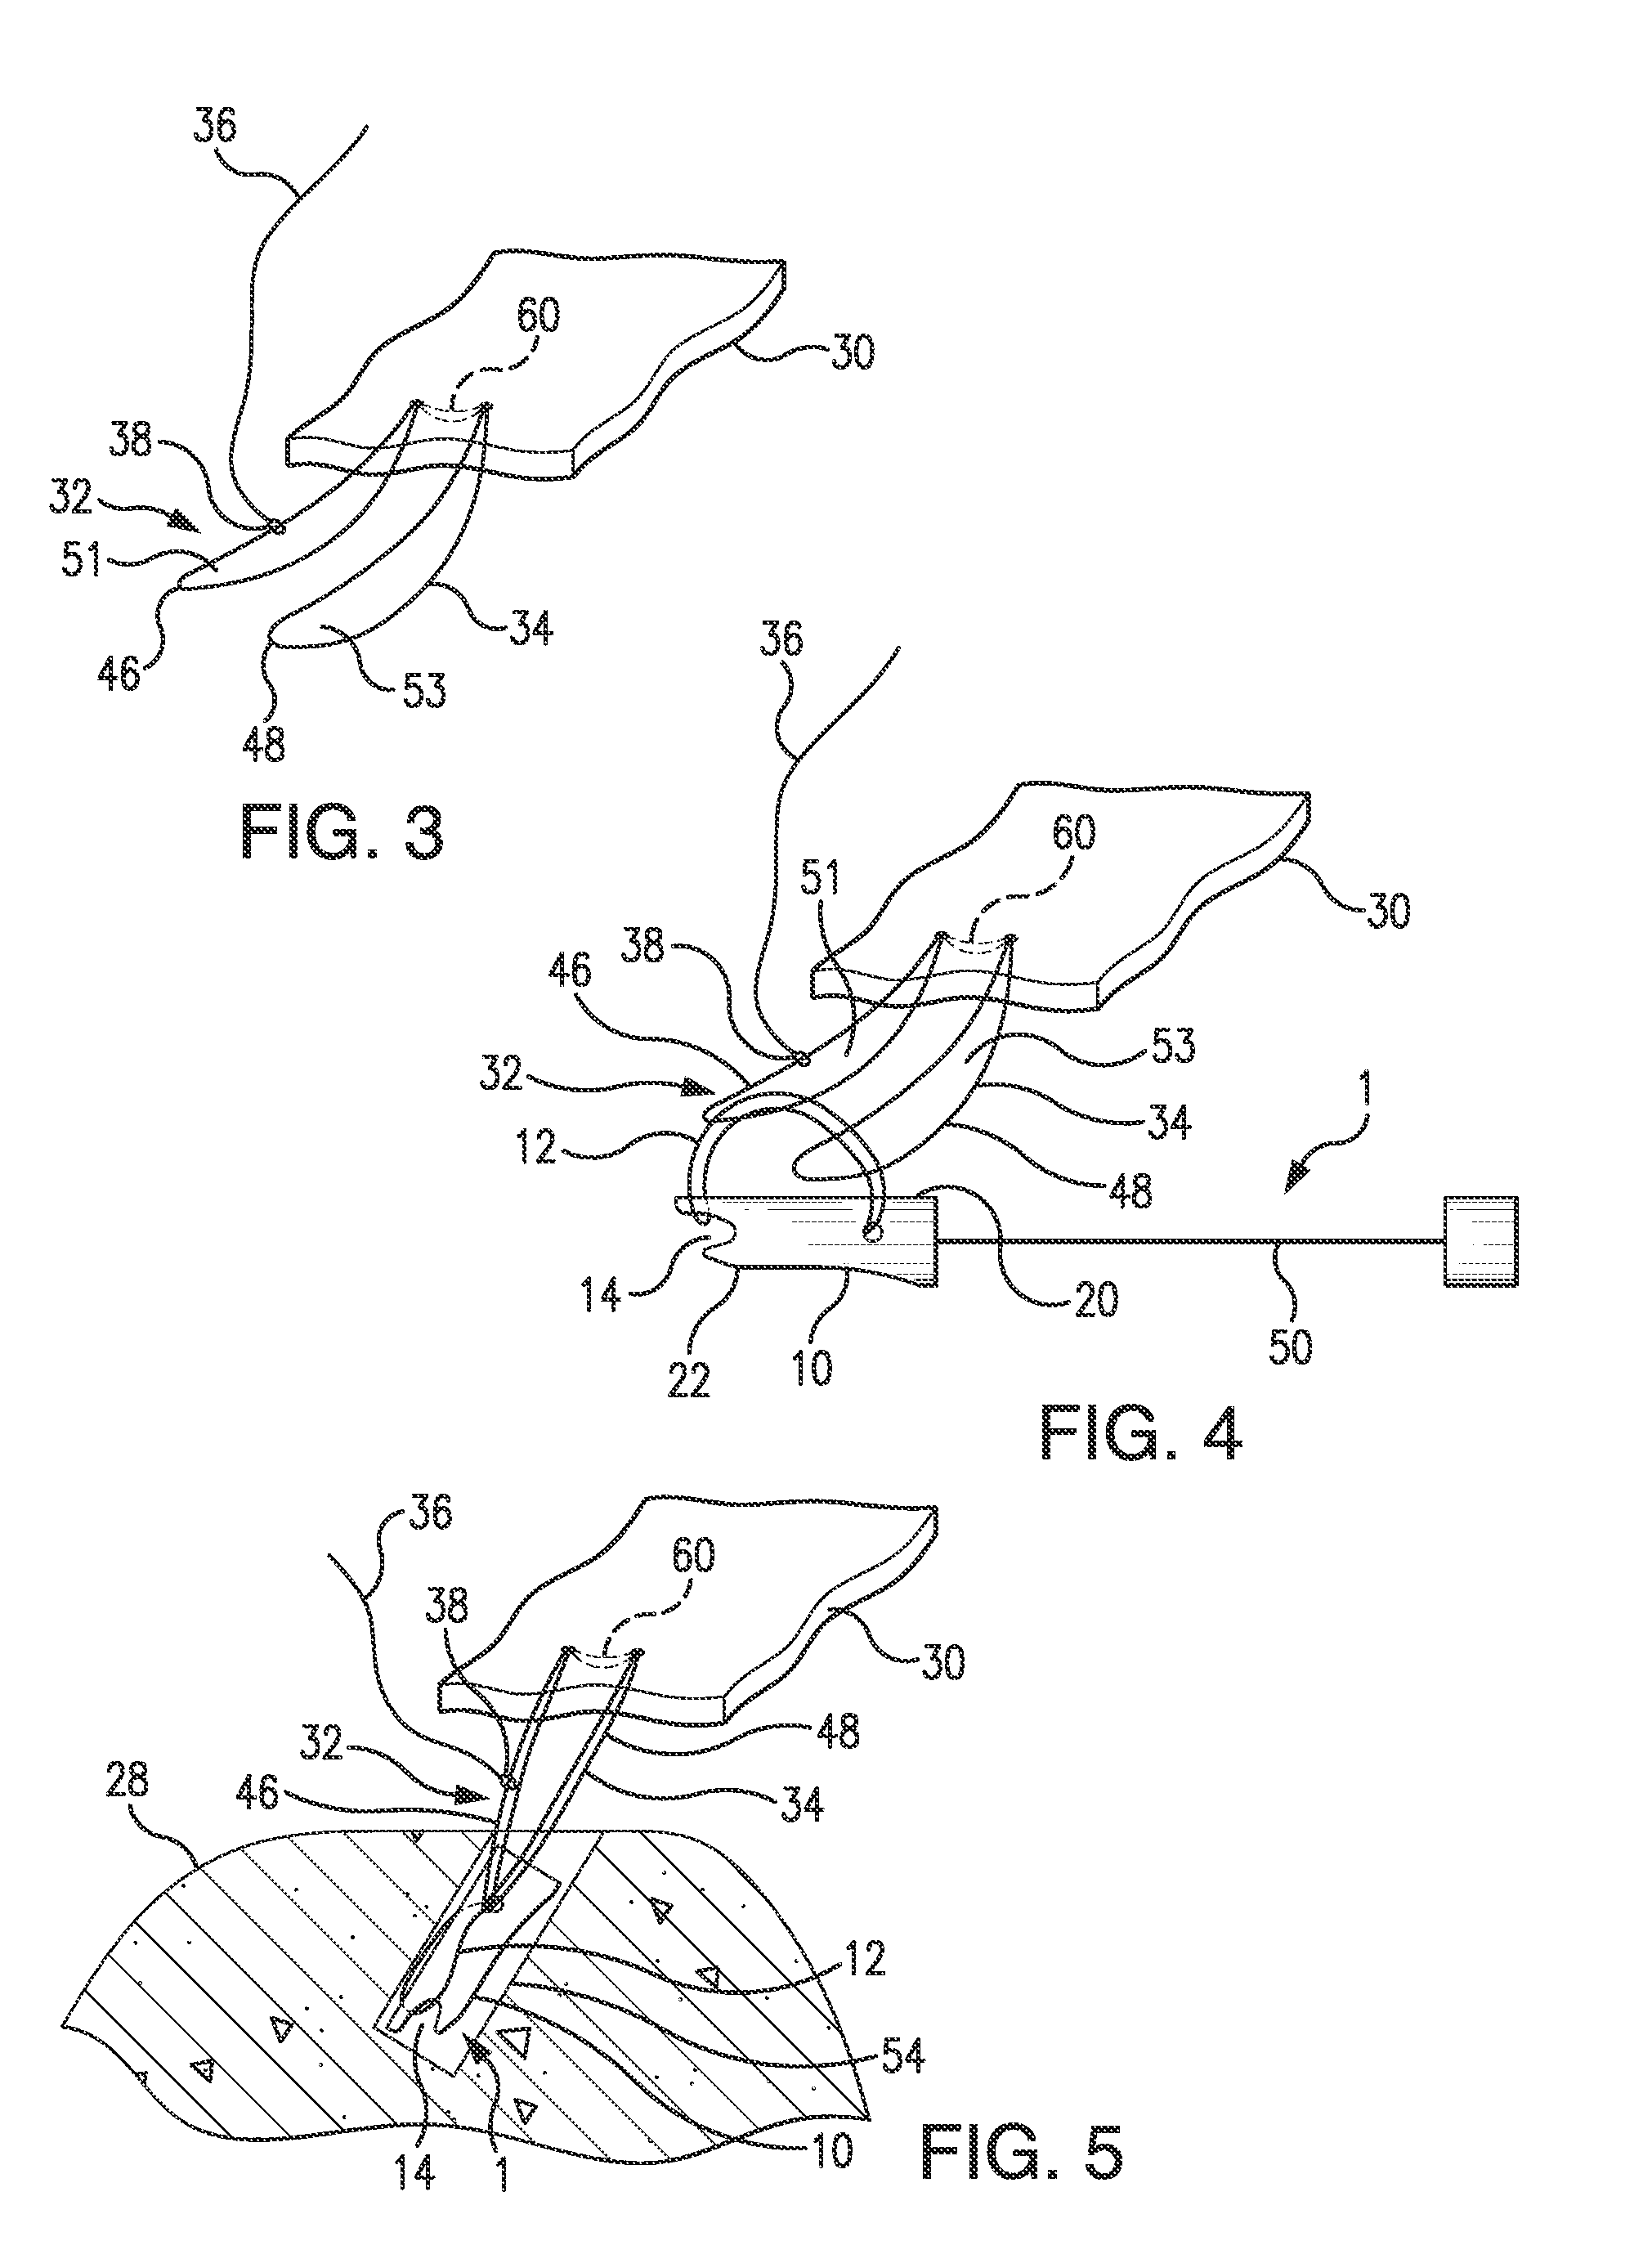 Multi-loop adjustable knotless anchor assembly, adjustable capture mechanism, and method for repair